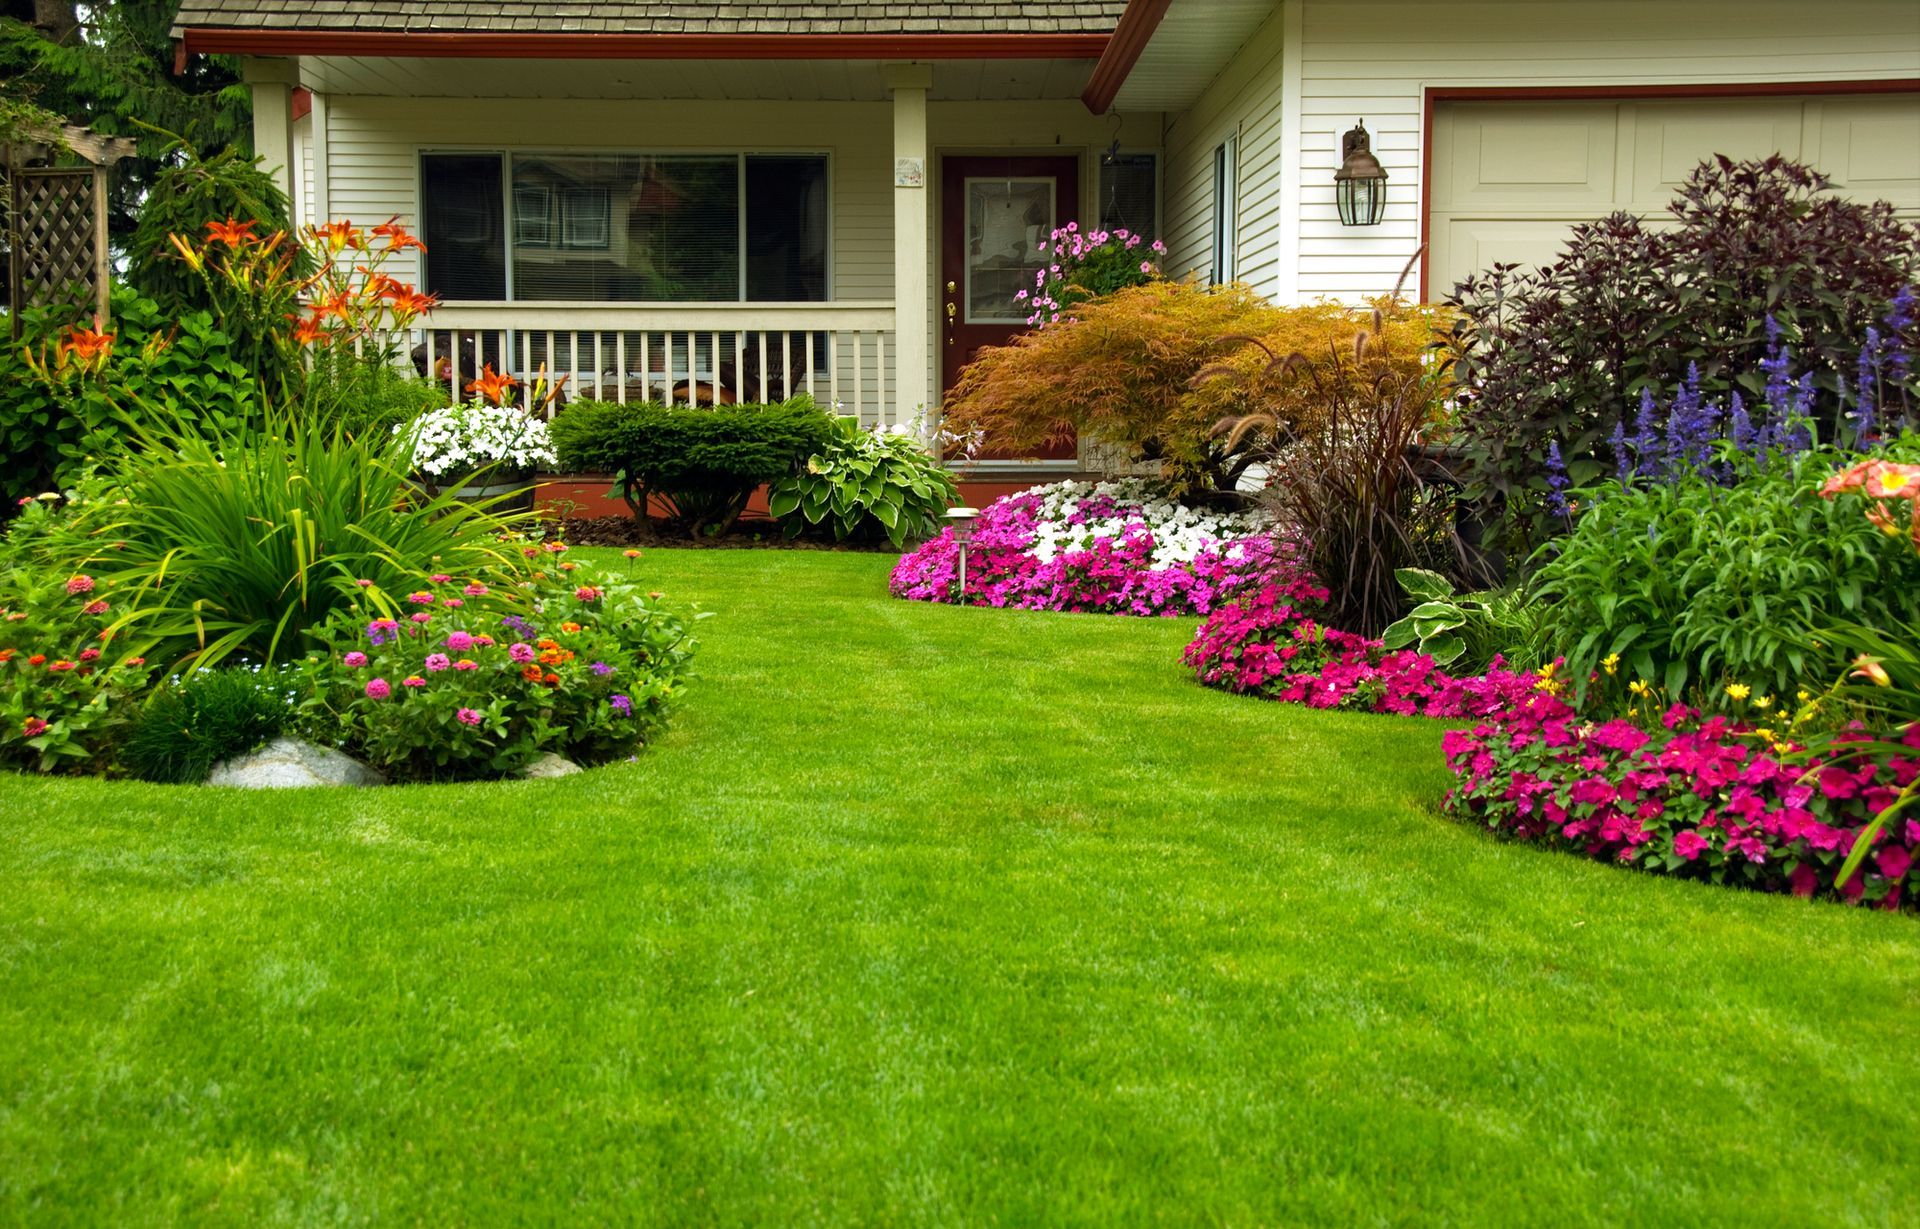 Transform Your Yard with Rez Home Services' Professional Landscaping